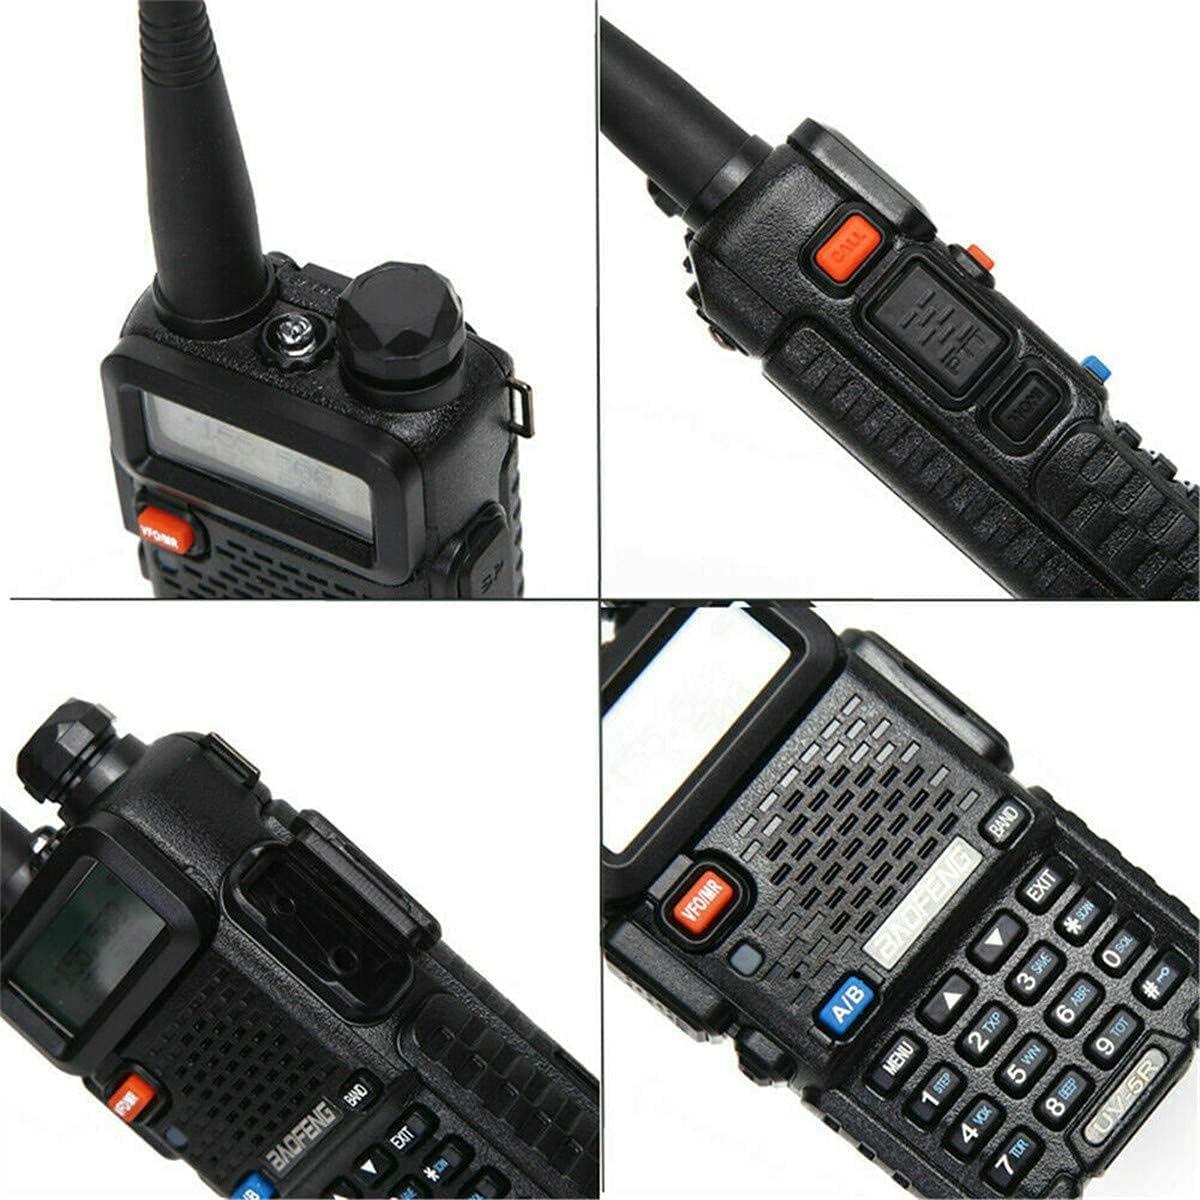  BaoFeng UV-5R Handheld Ham Radio with Extra 1800mAh Battery and  Greaval GV-771 High Gain Antenna, Dual Band Two Way Radio Includes Full Kit  (Black) : Electronics